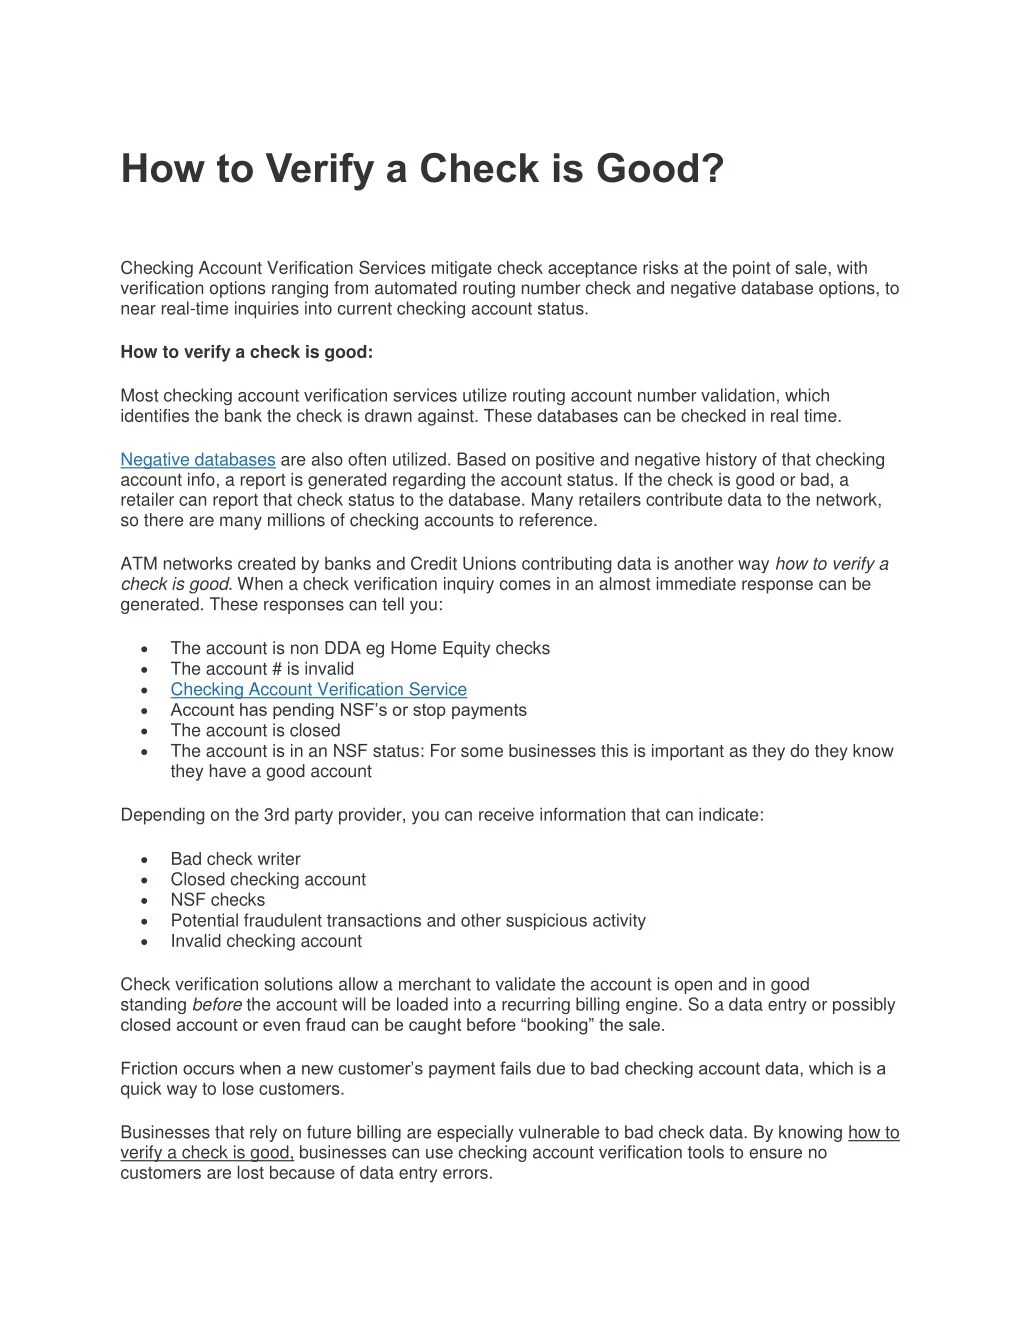 how to verify a check is good